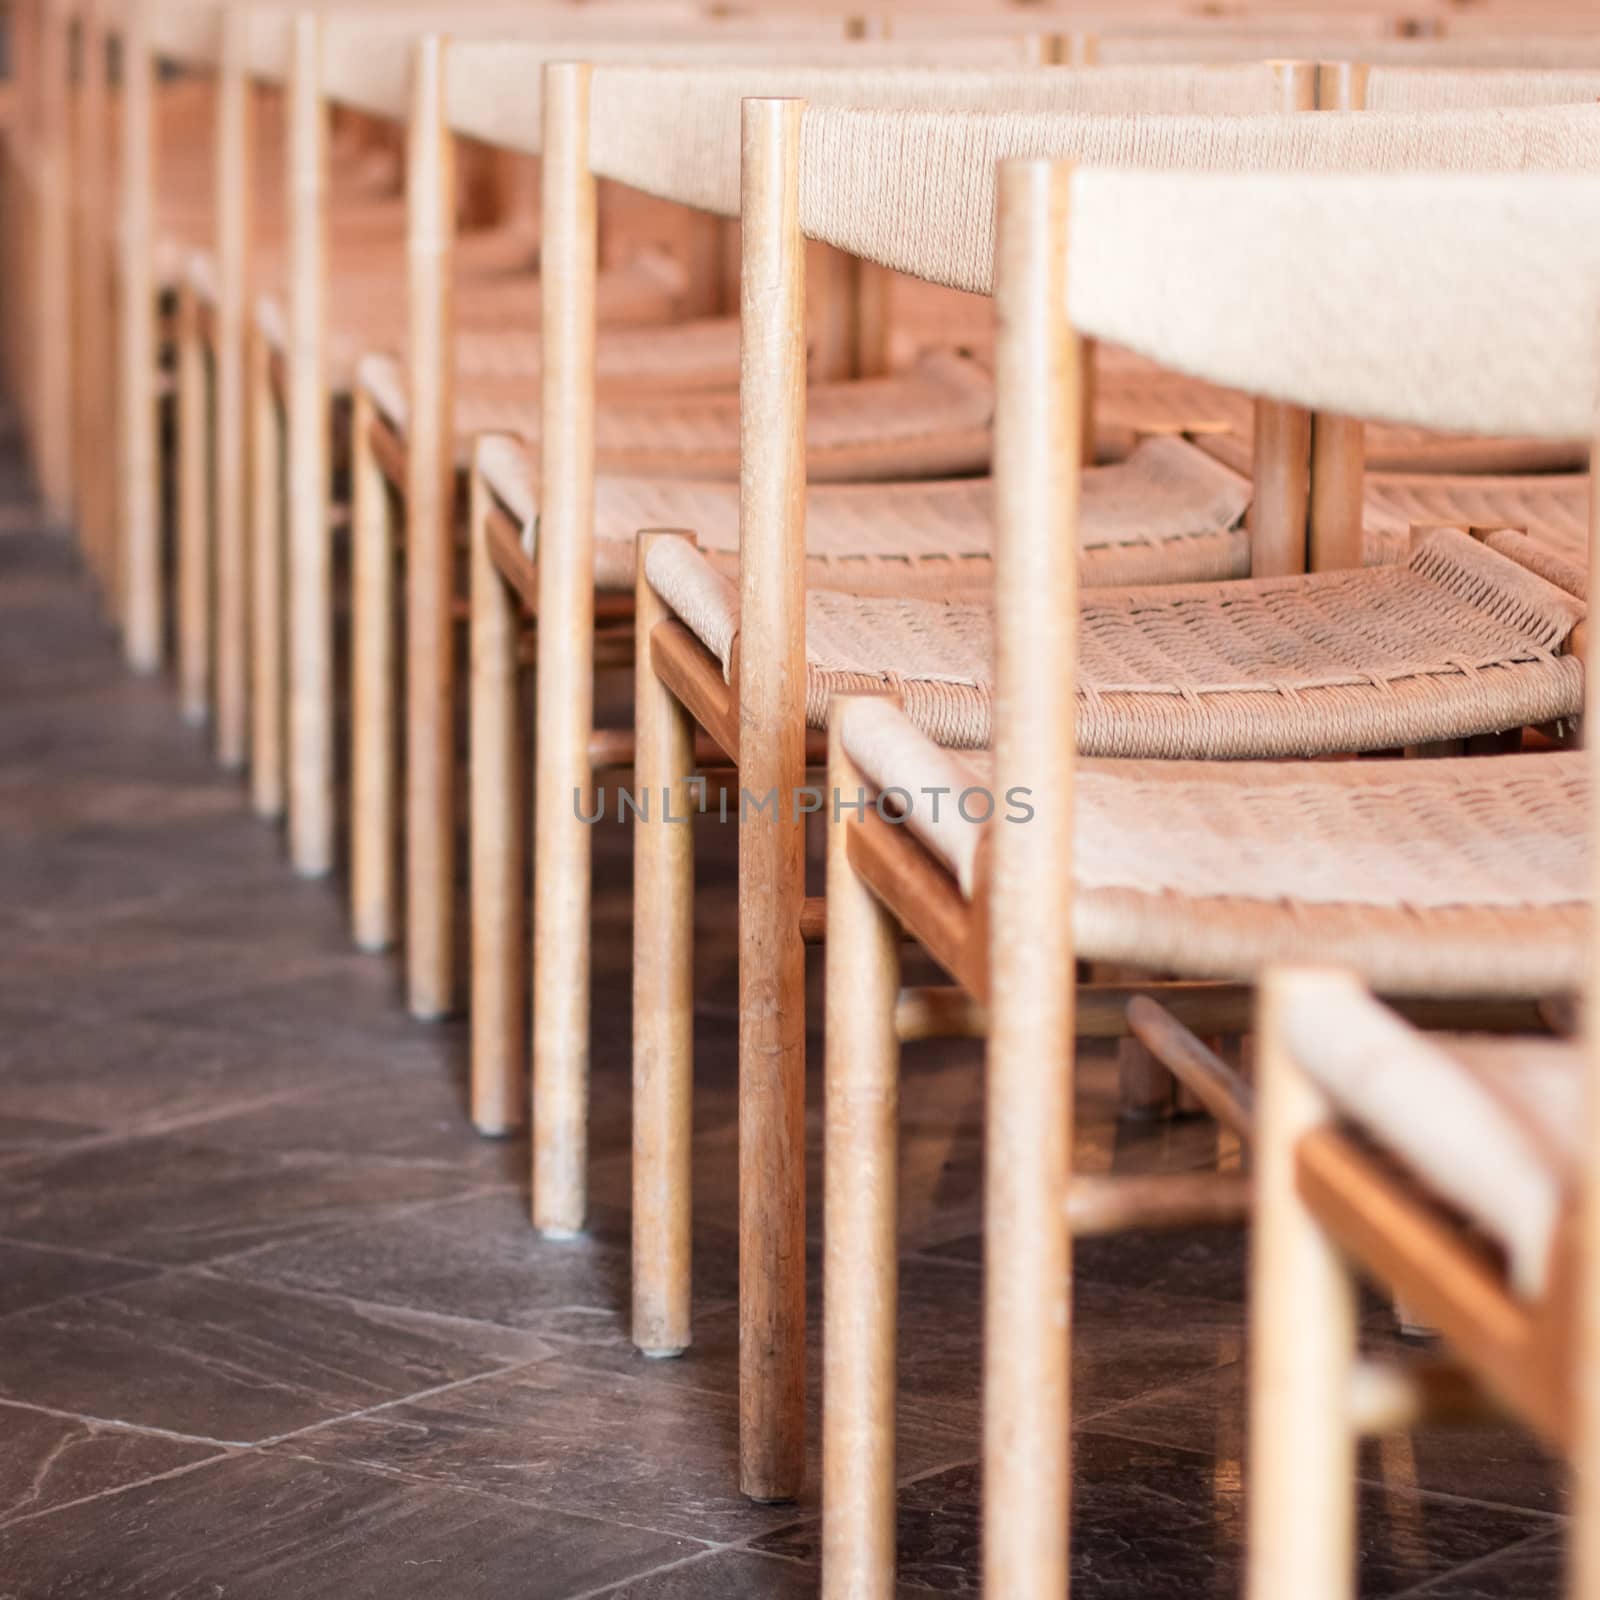 Rows of seats inside an empty church, selective focus